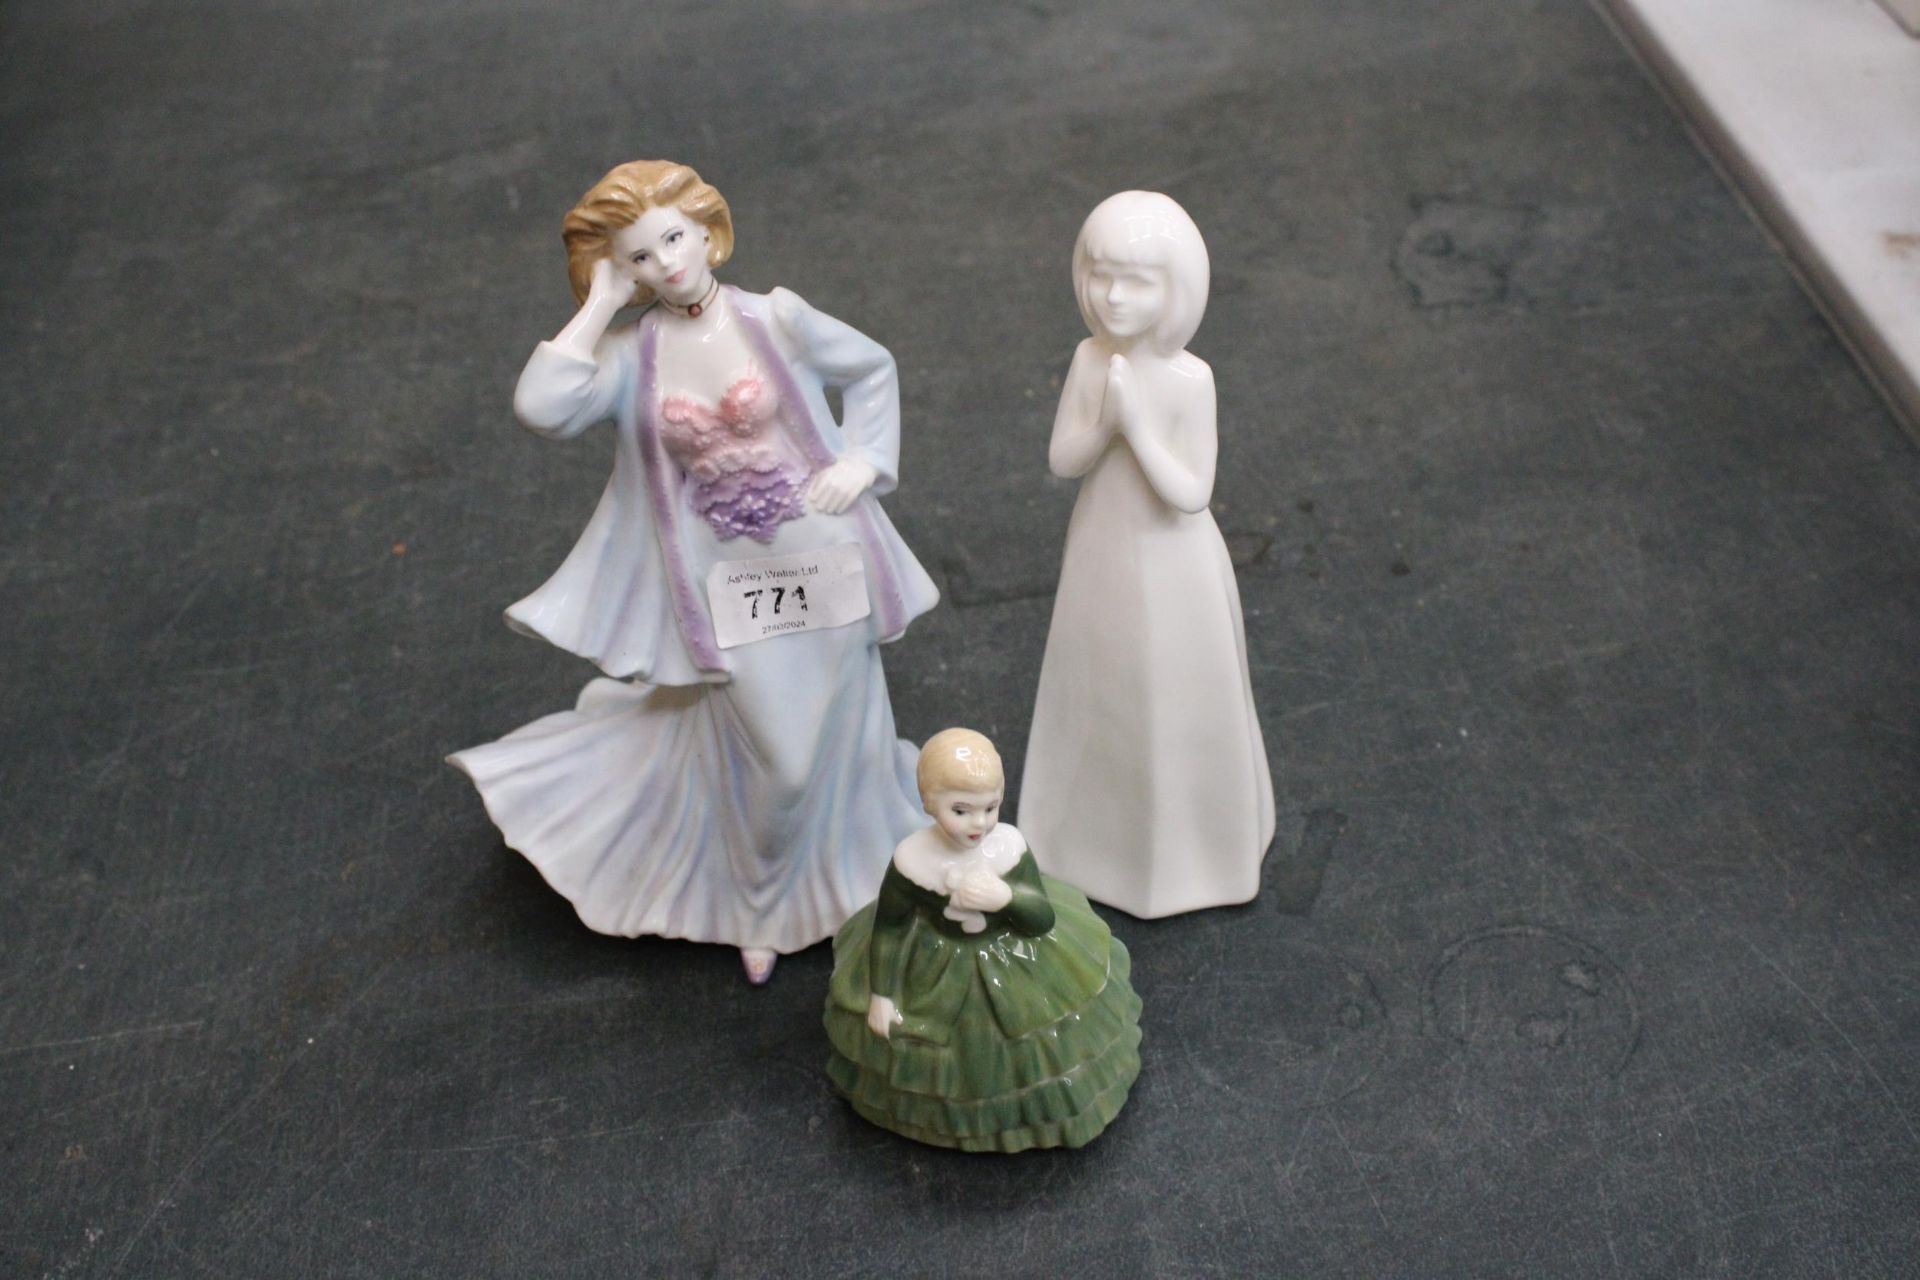 A ROYAL WORCESTER FIGURINE "THOUGHTFUL" TOGETHER WITH A ROYAL DOULTON "IMAGES" FIGURE AND BELLA